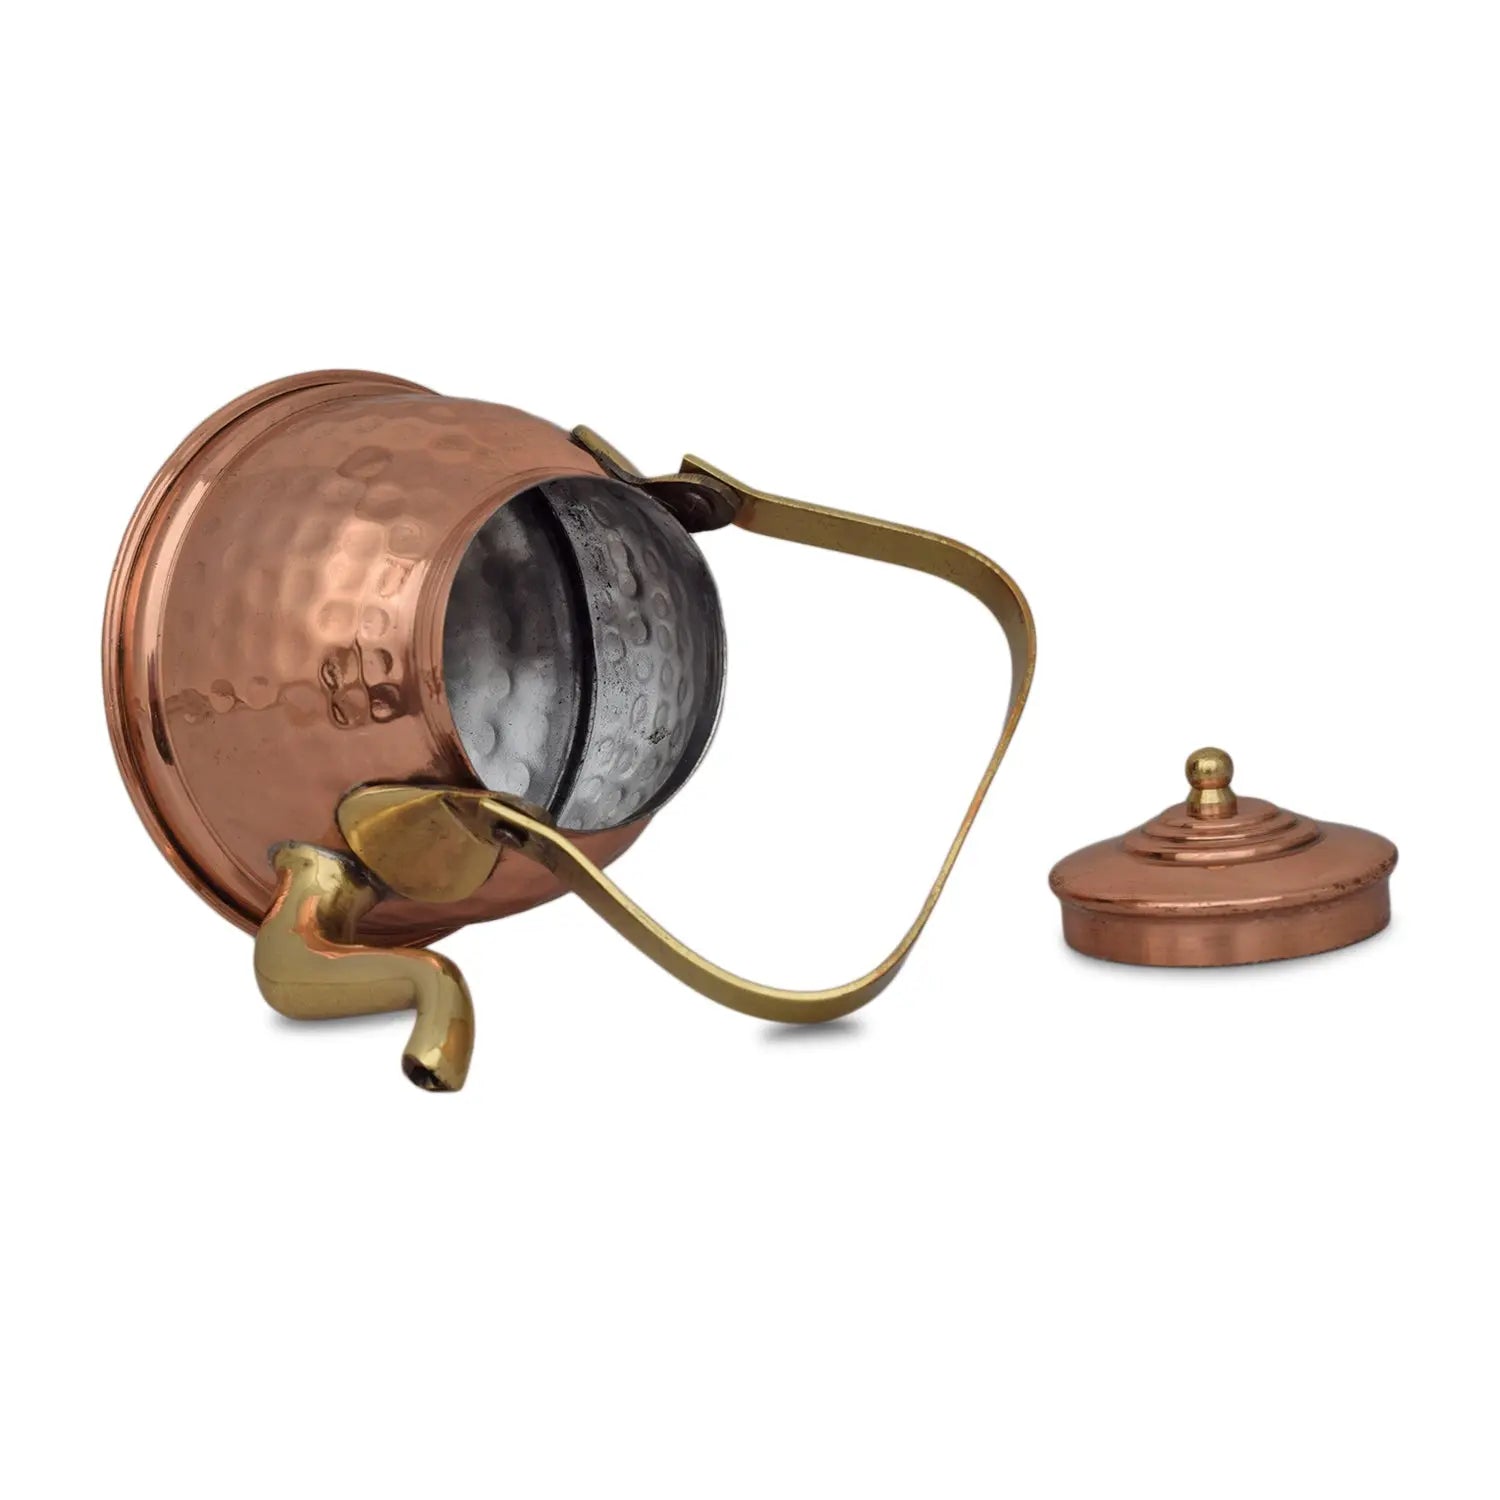 Pure Copper Kettle For 2 Cups Pot For Cooking - CROCKERY WALA AND COMPANY 